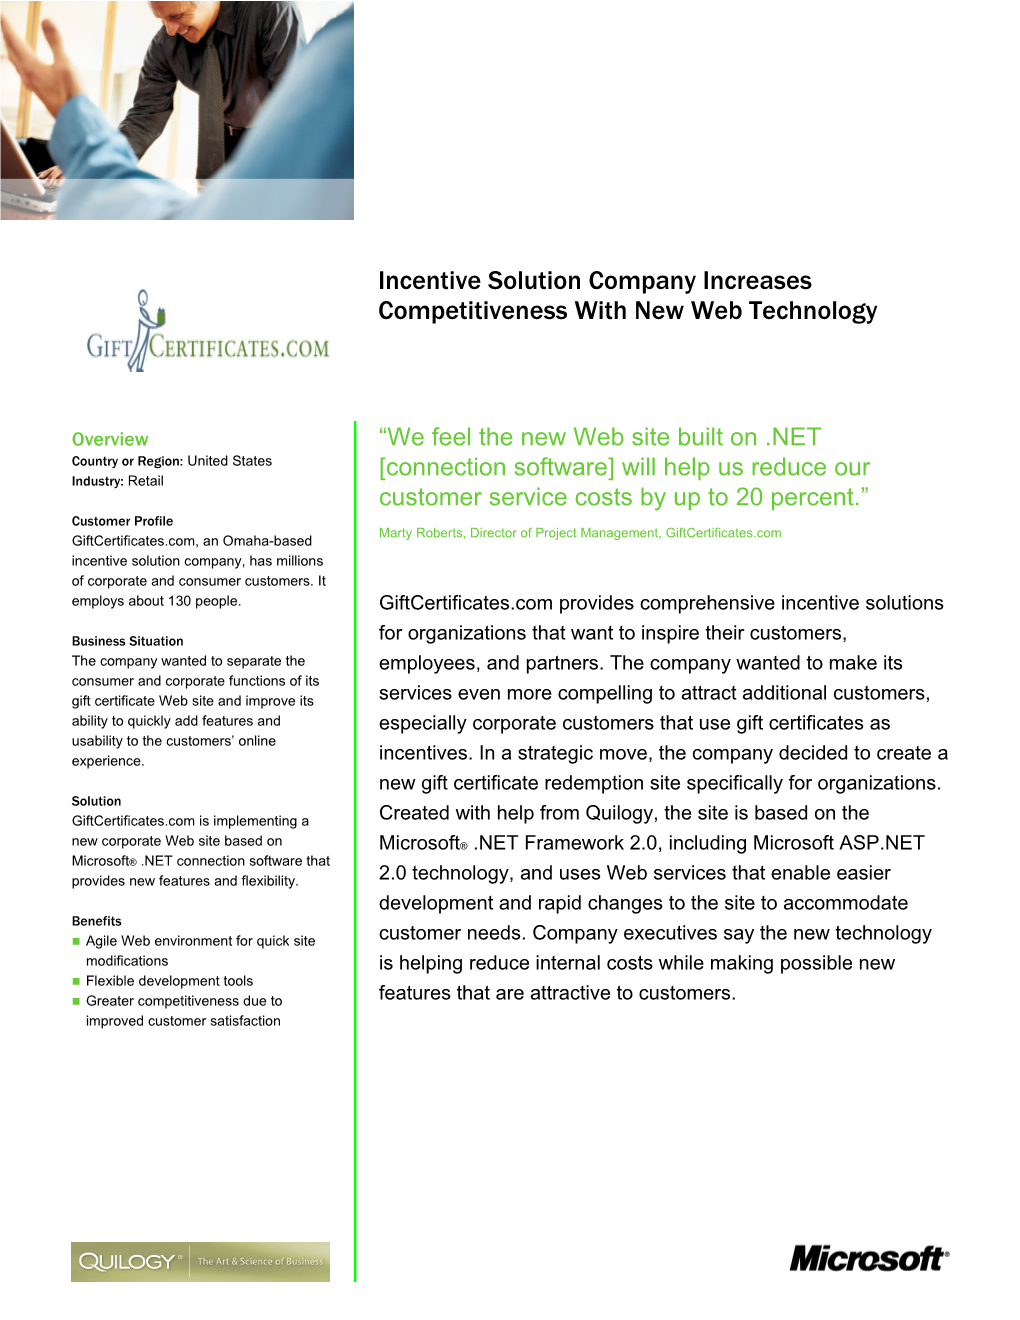 Incentive Solution Company Increases Competitiveness with New Web Technology